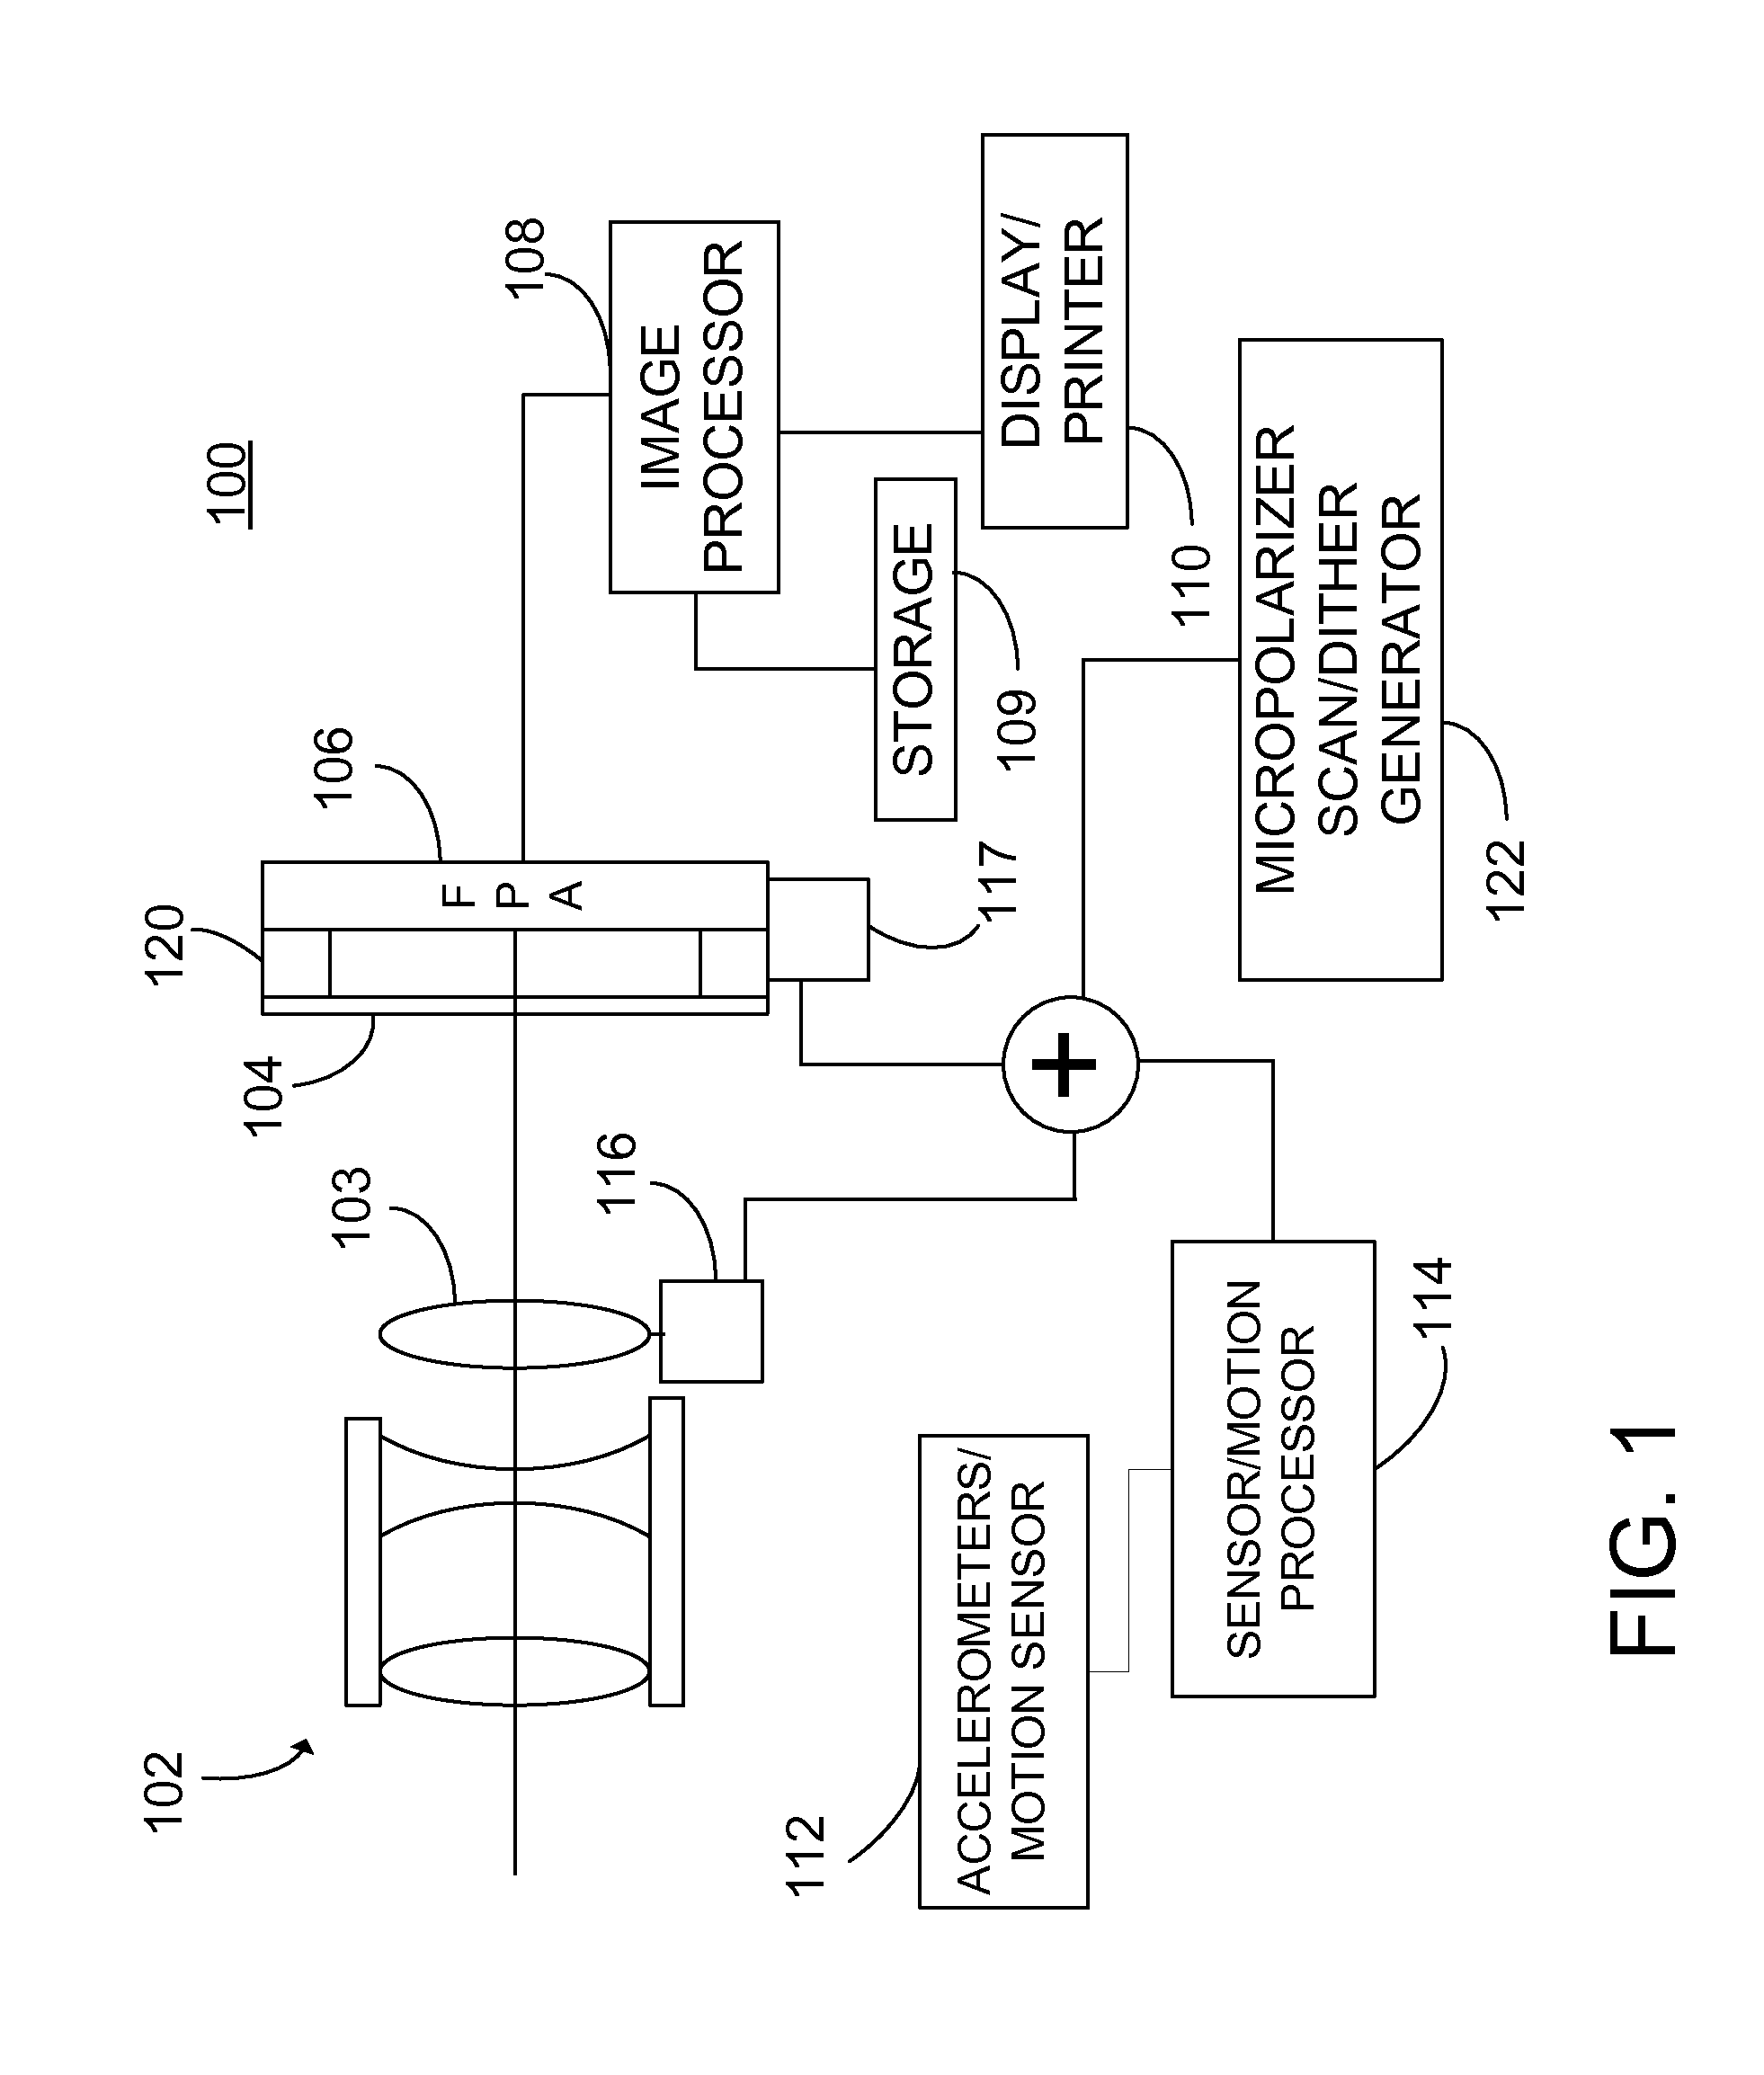 Microgrid imaging polarimeters with frequency domain reconstruction